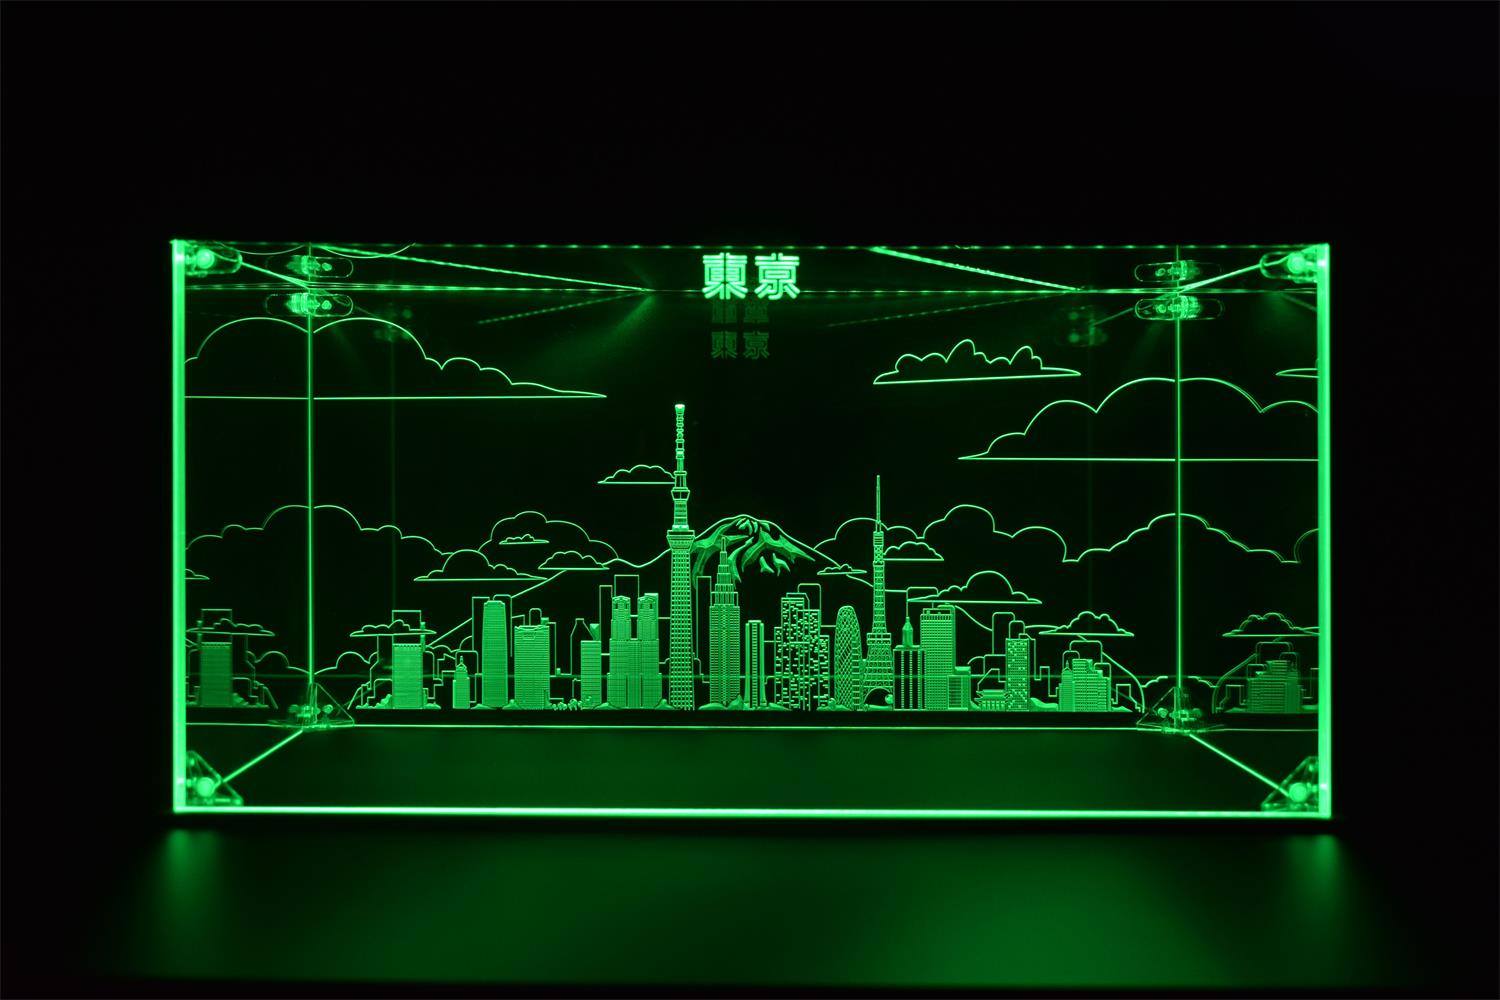 Tokyo Skyline LED Display Case for Diecast Scale Cars, Lego, Action Figures